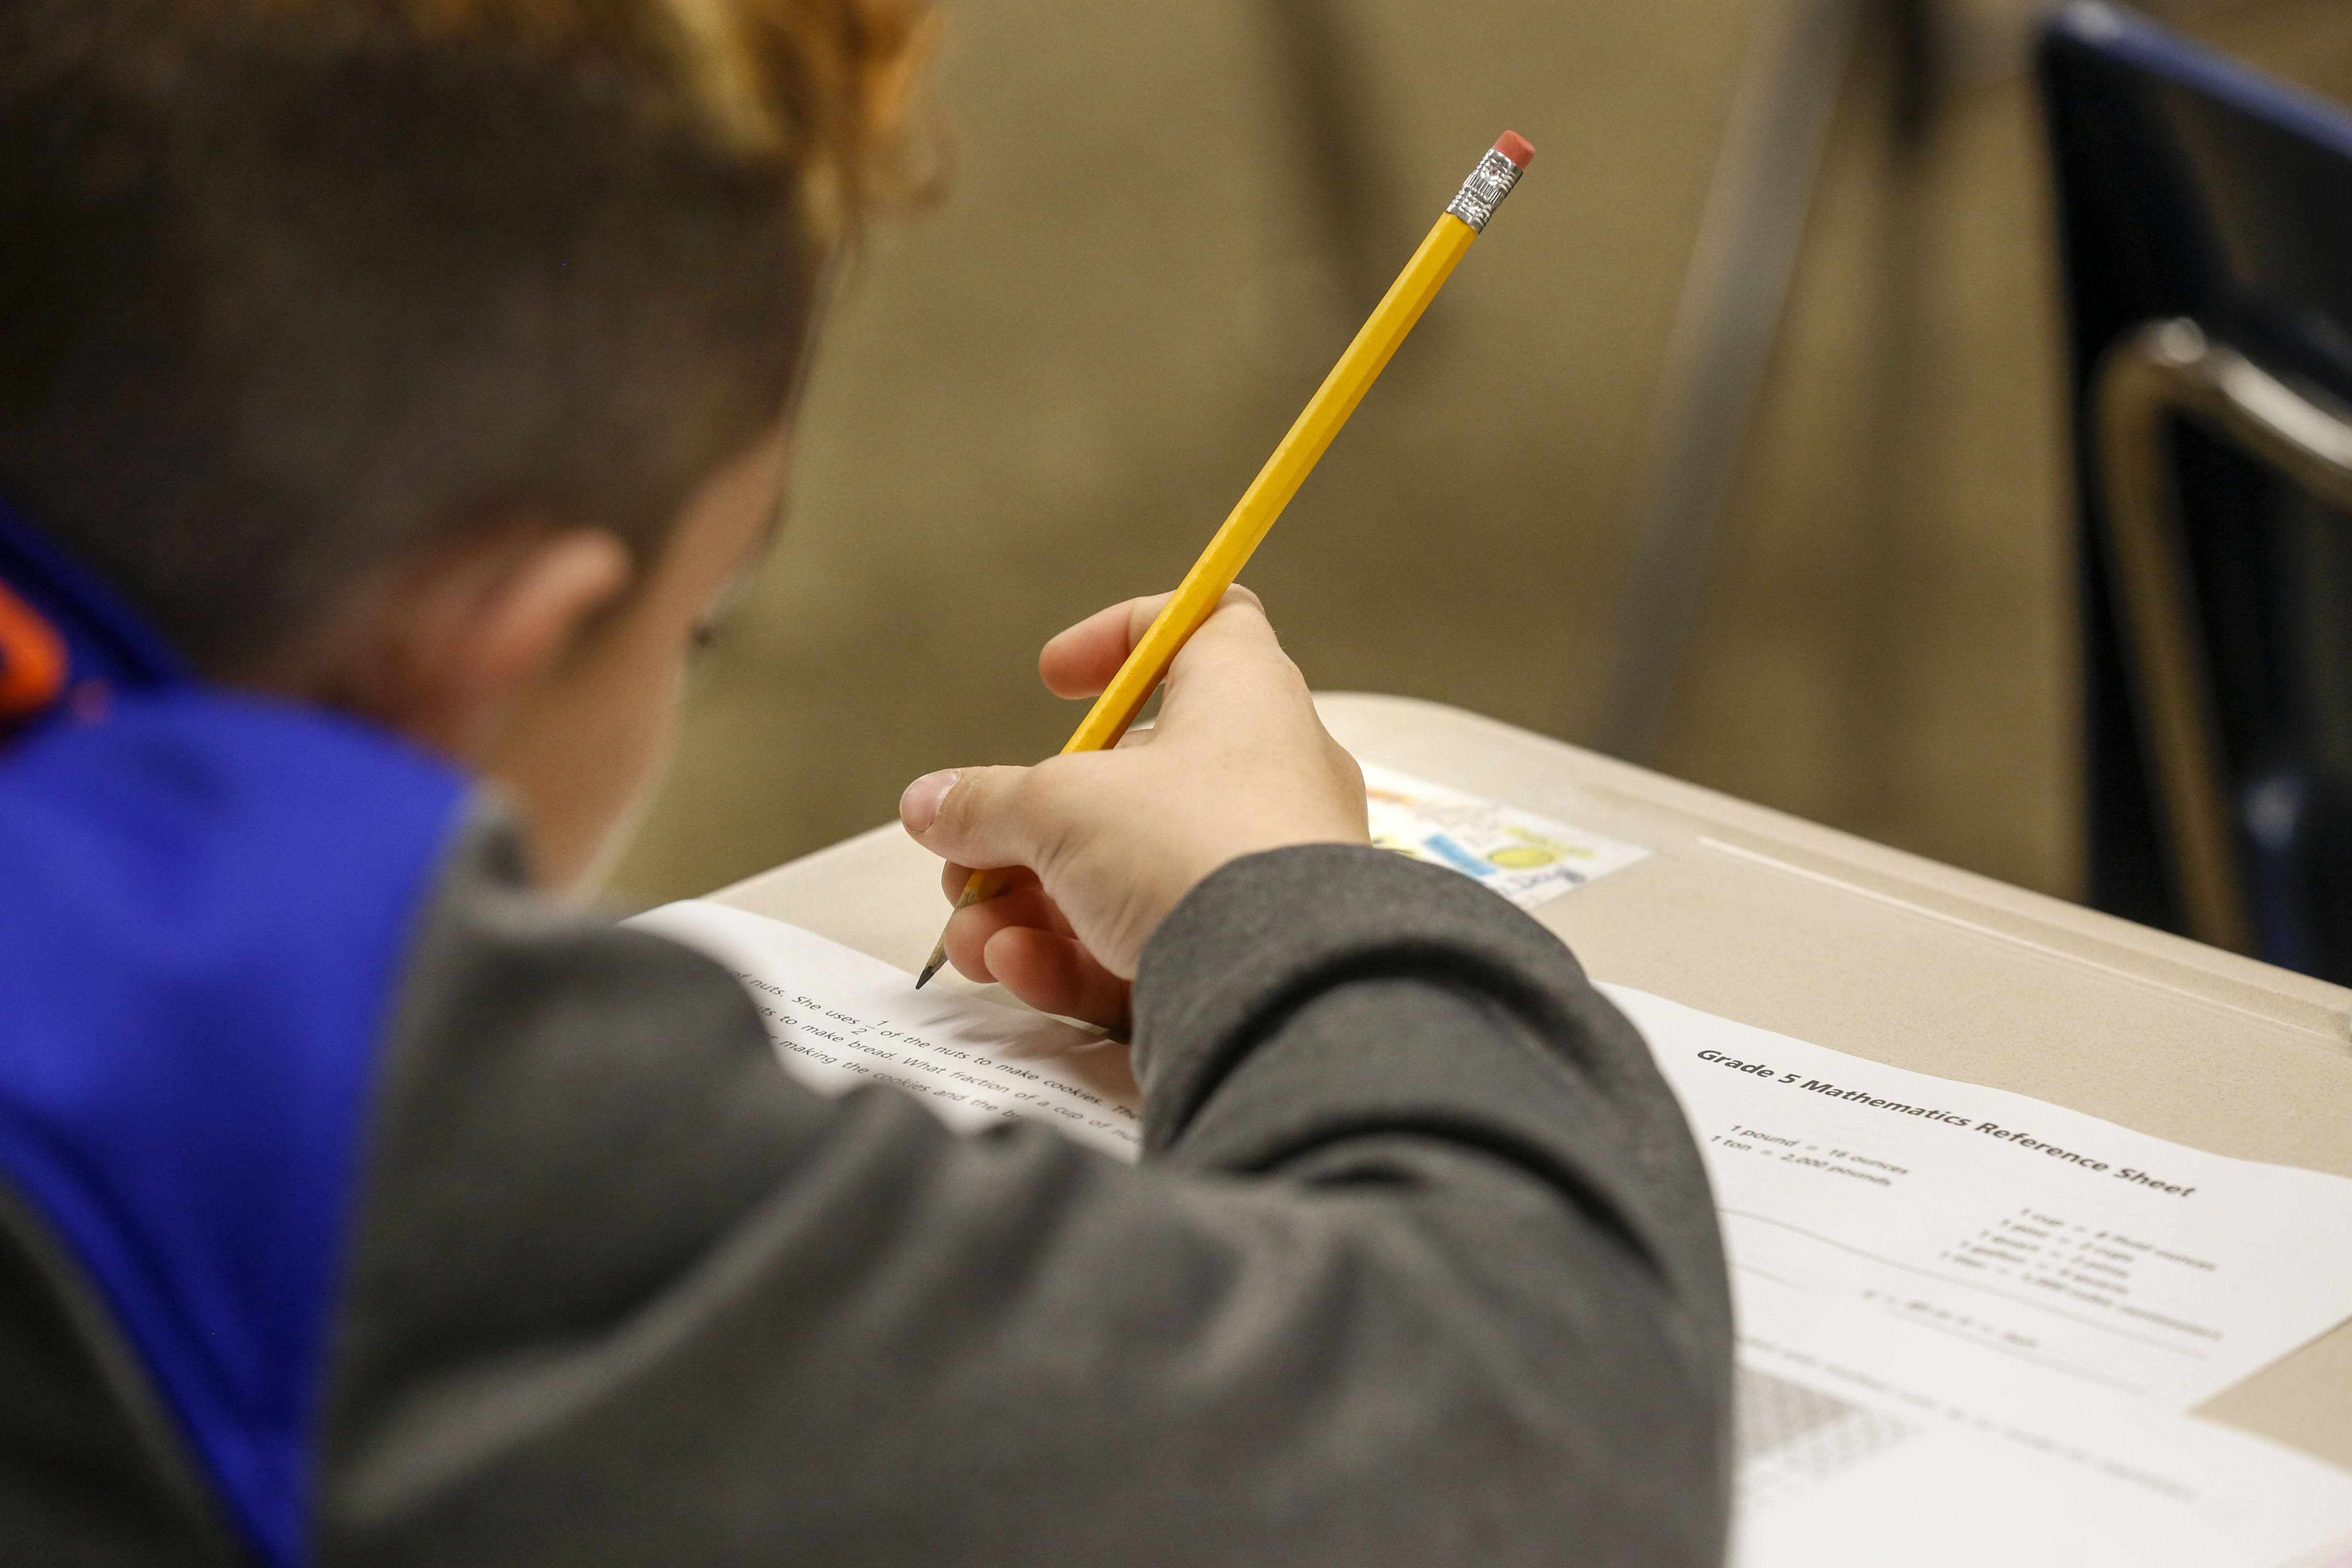 A student takes a test at their desk, writing with a number two pencil.